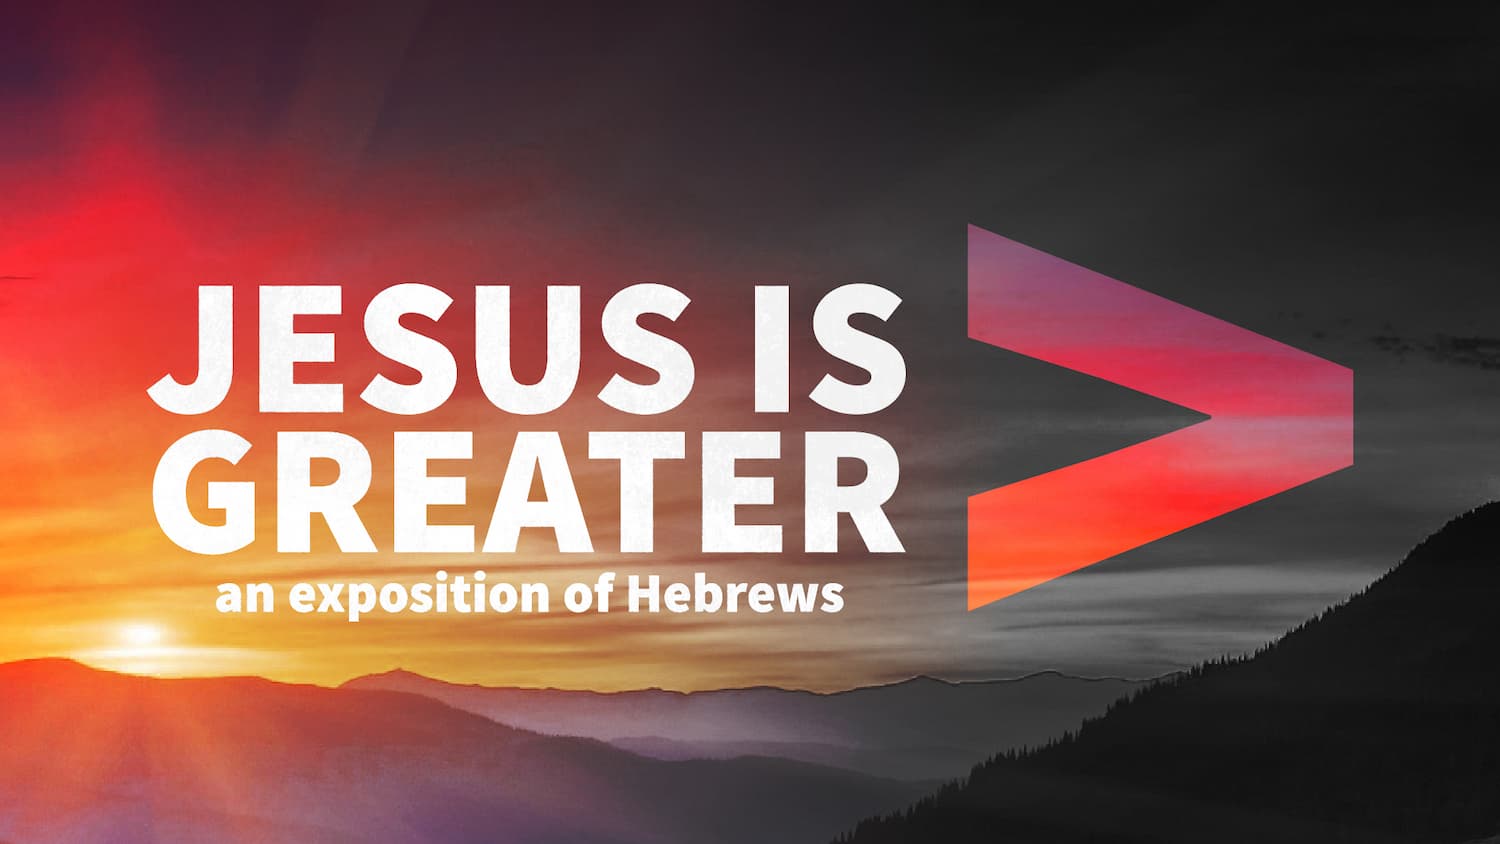 In this series, we are going verse by verse through the book of Hebrews. This book is all about Jesus and how he is greater than all!